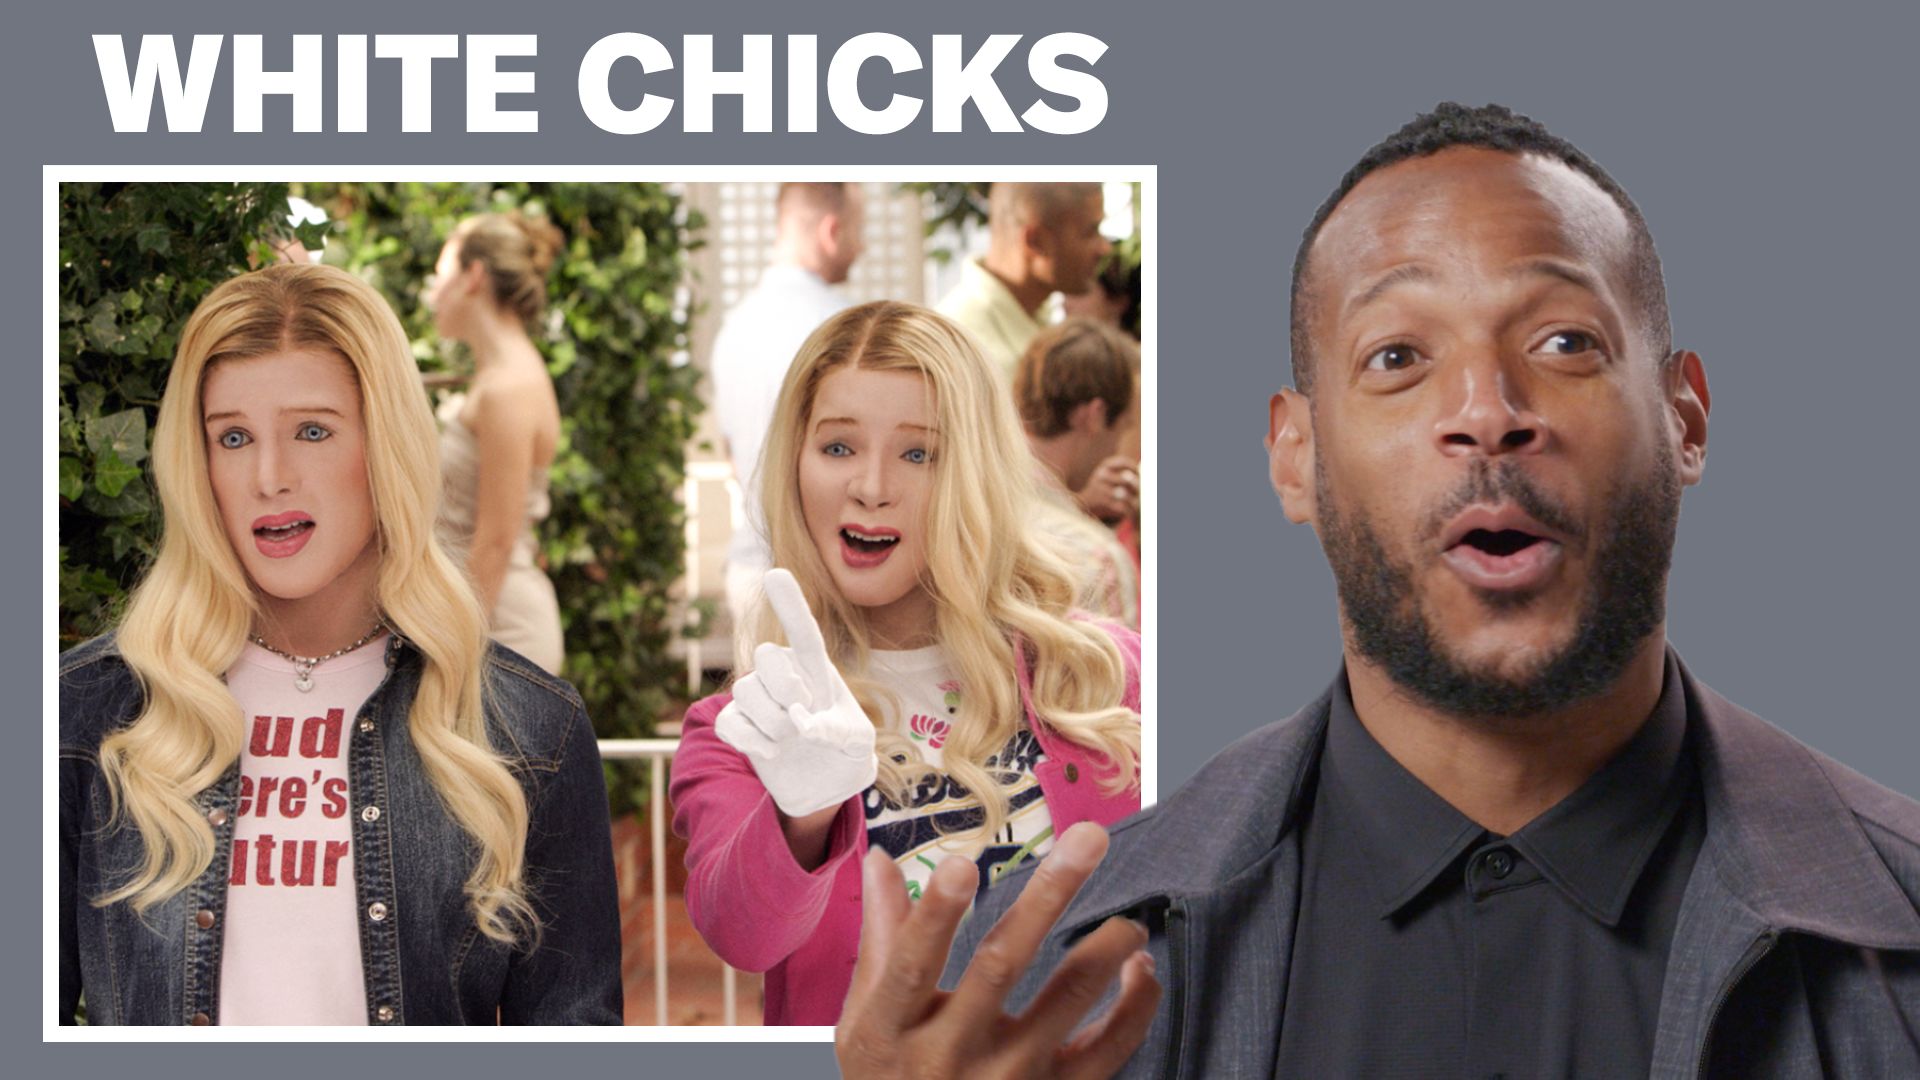 Marlon Wayans rips into cancel culture and says movies like White